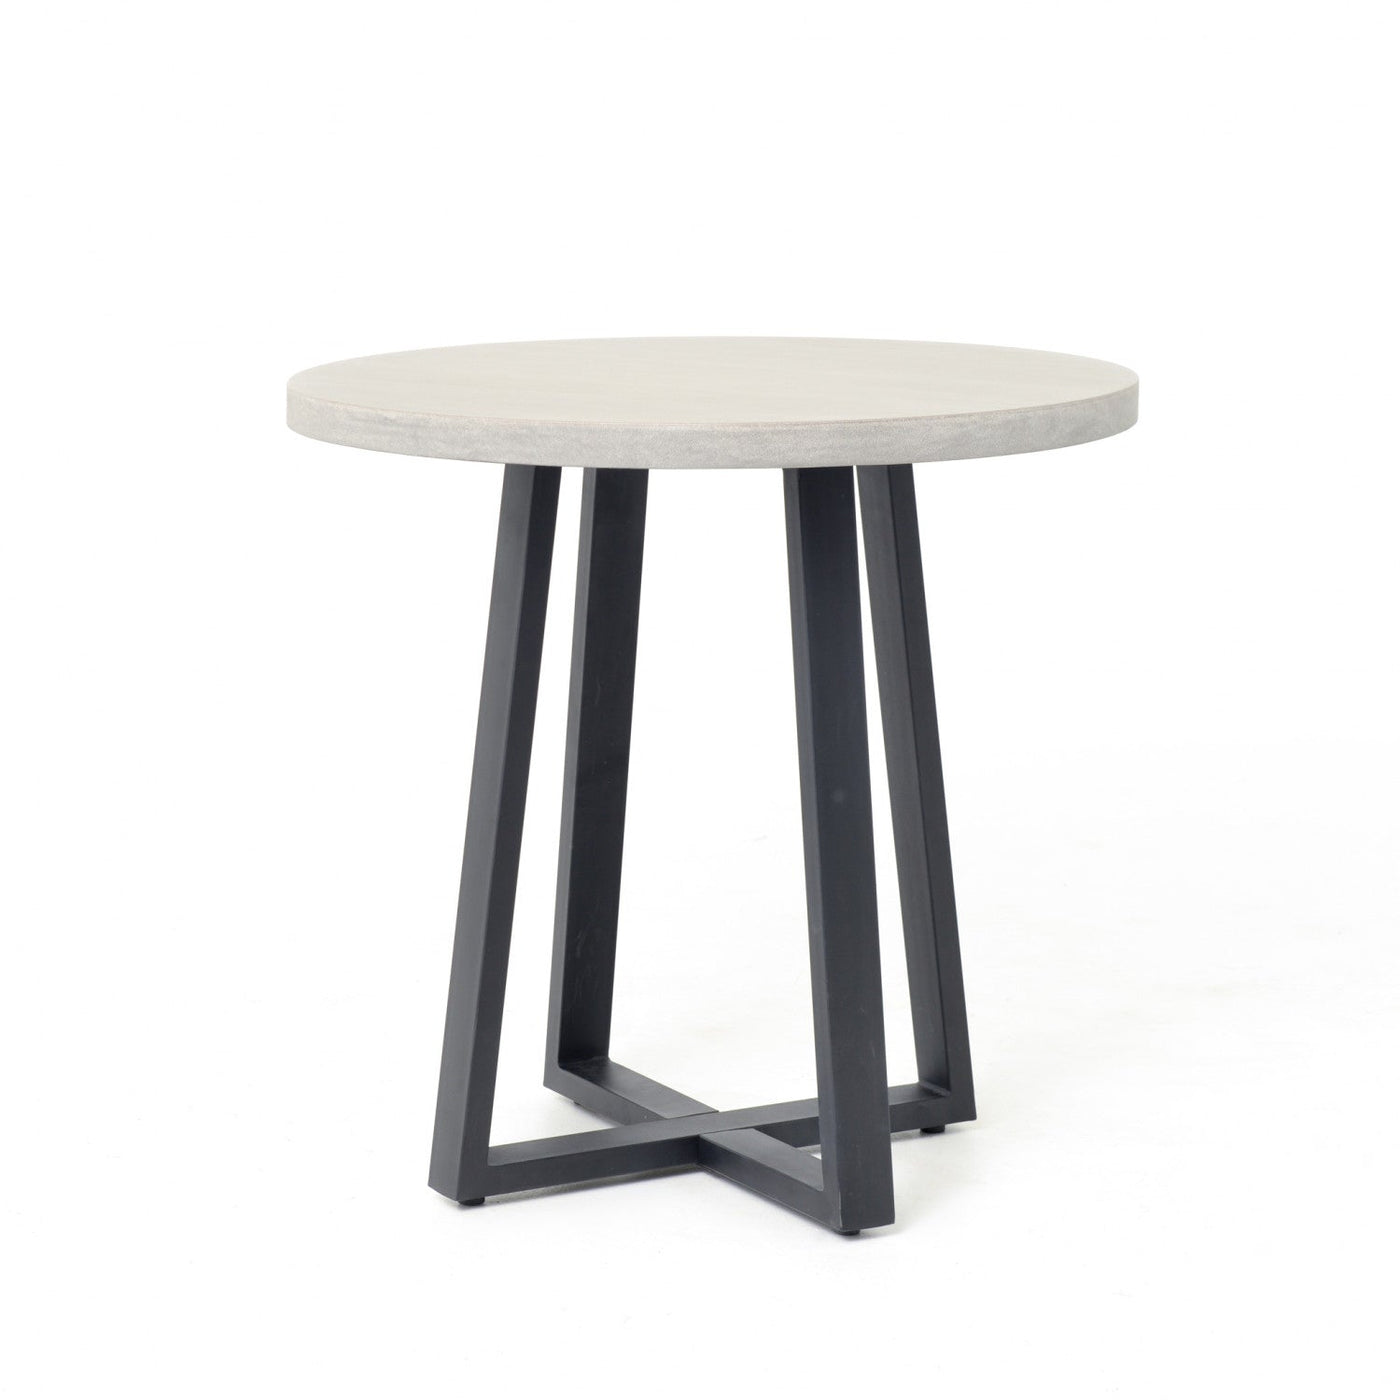 CYRUS OUTDOOR ROUND DINING TABLE